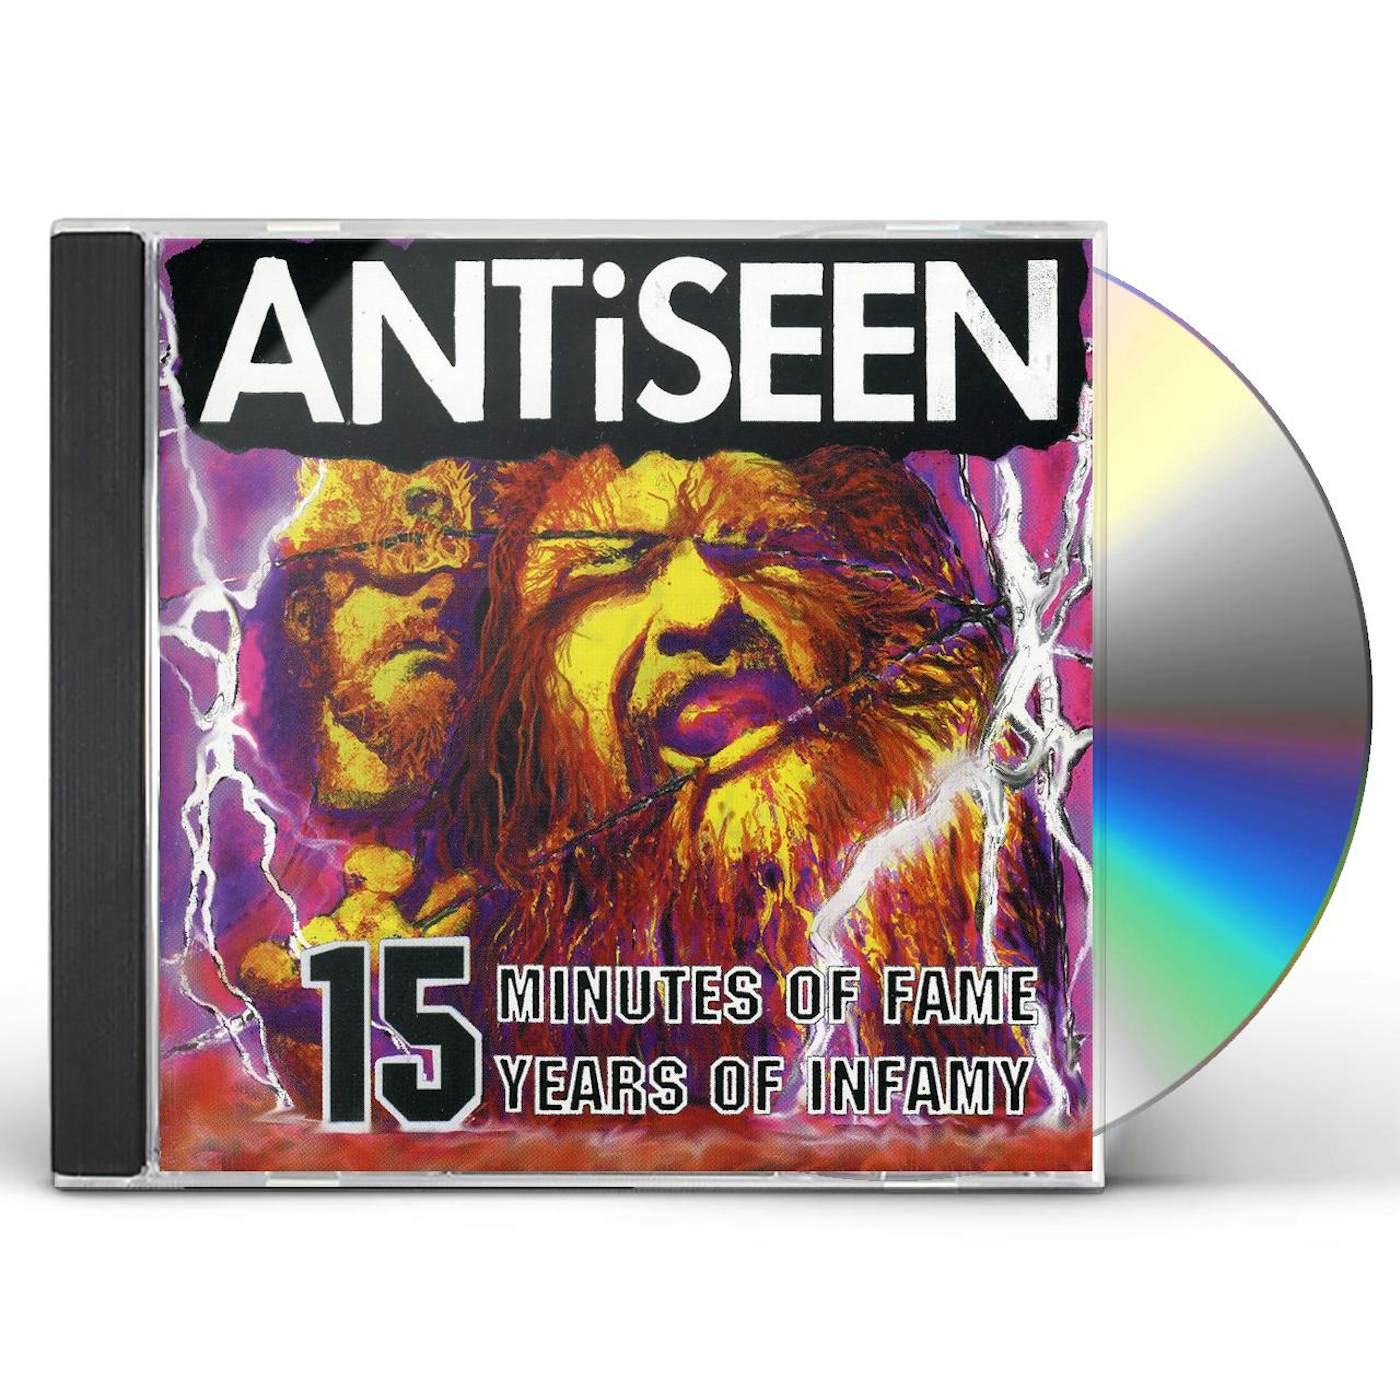 Antiseen 15 MINUTES OF FAME 15 YEARS OF INFAMY CD